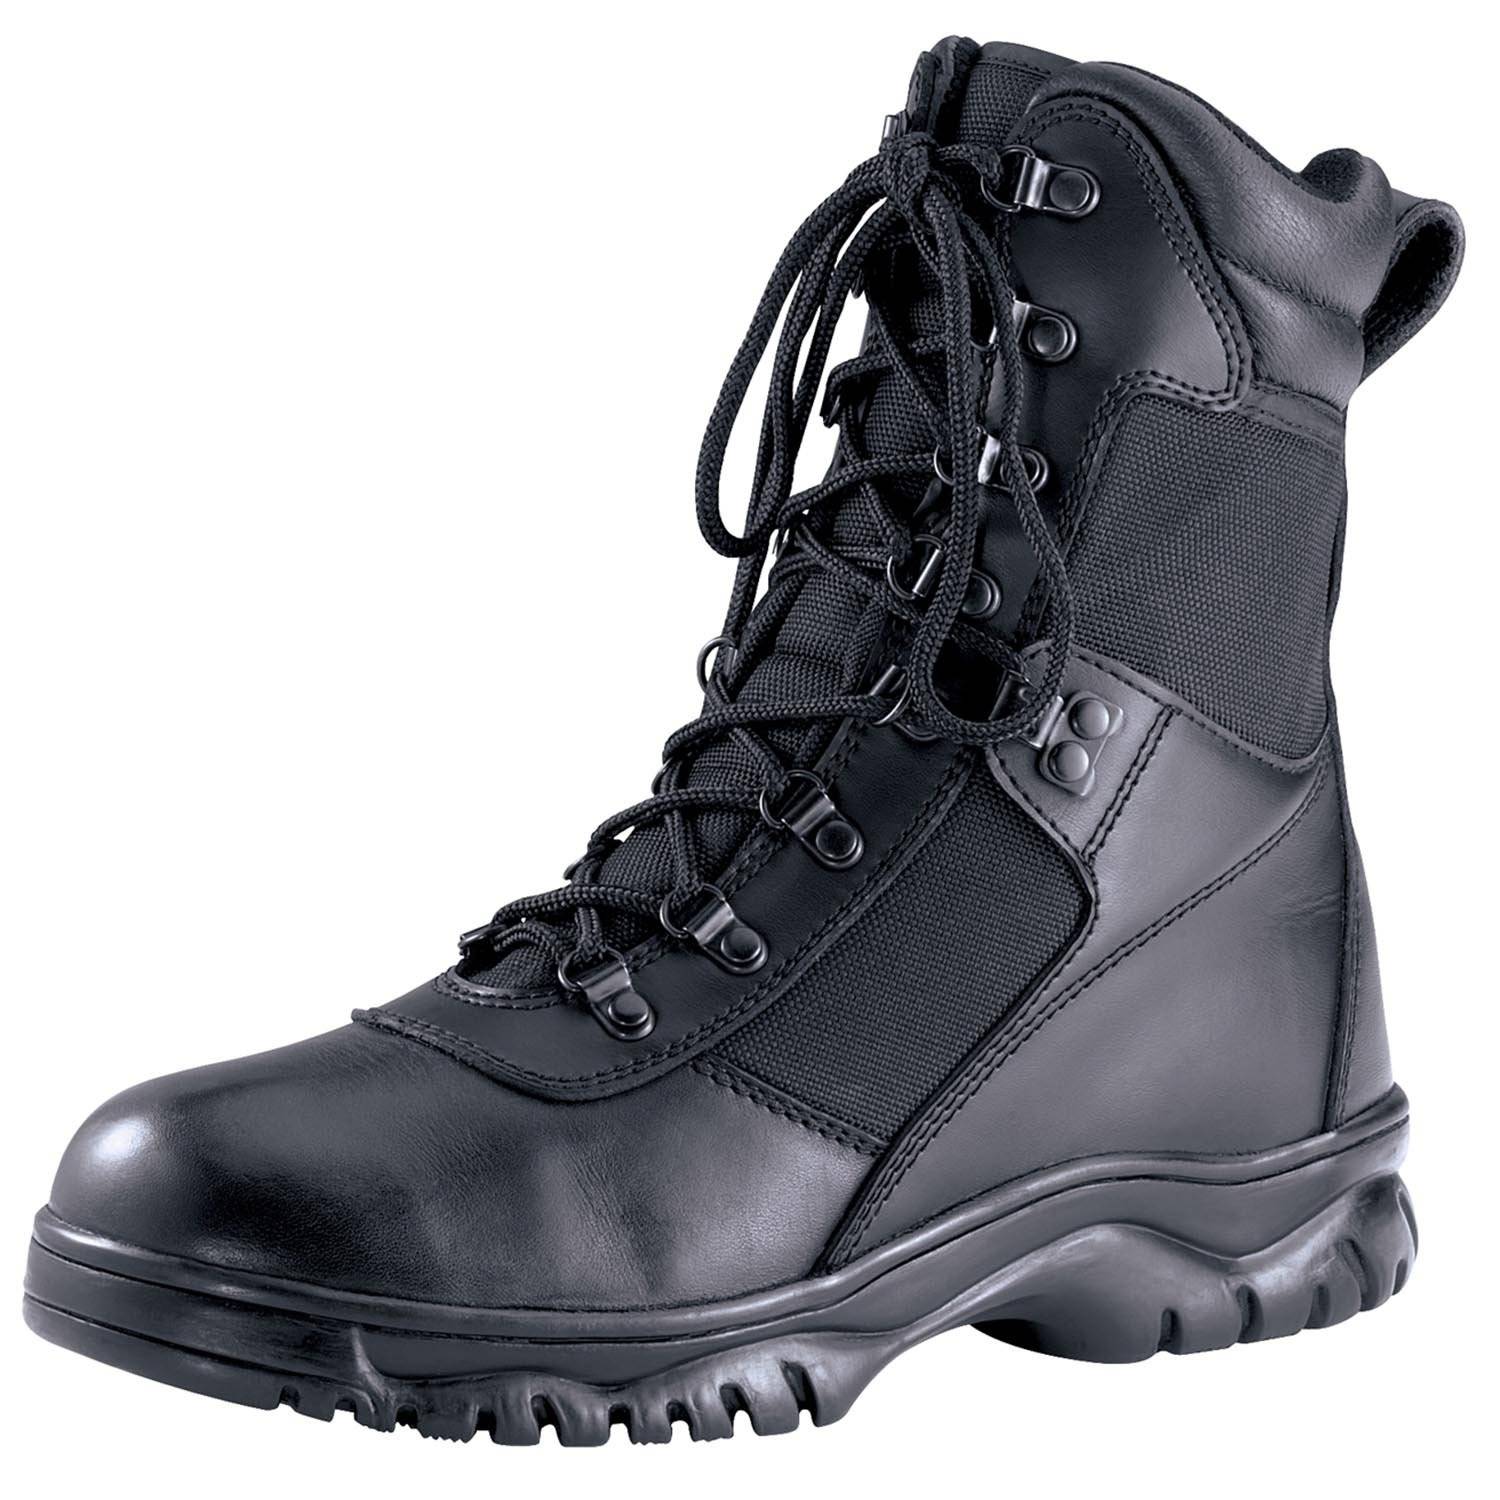 Rothco 8" Forced Entry Waterproof Tactical Boots